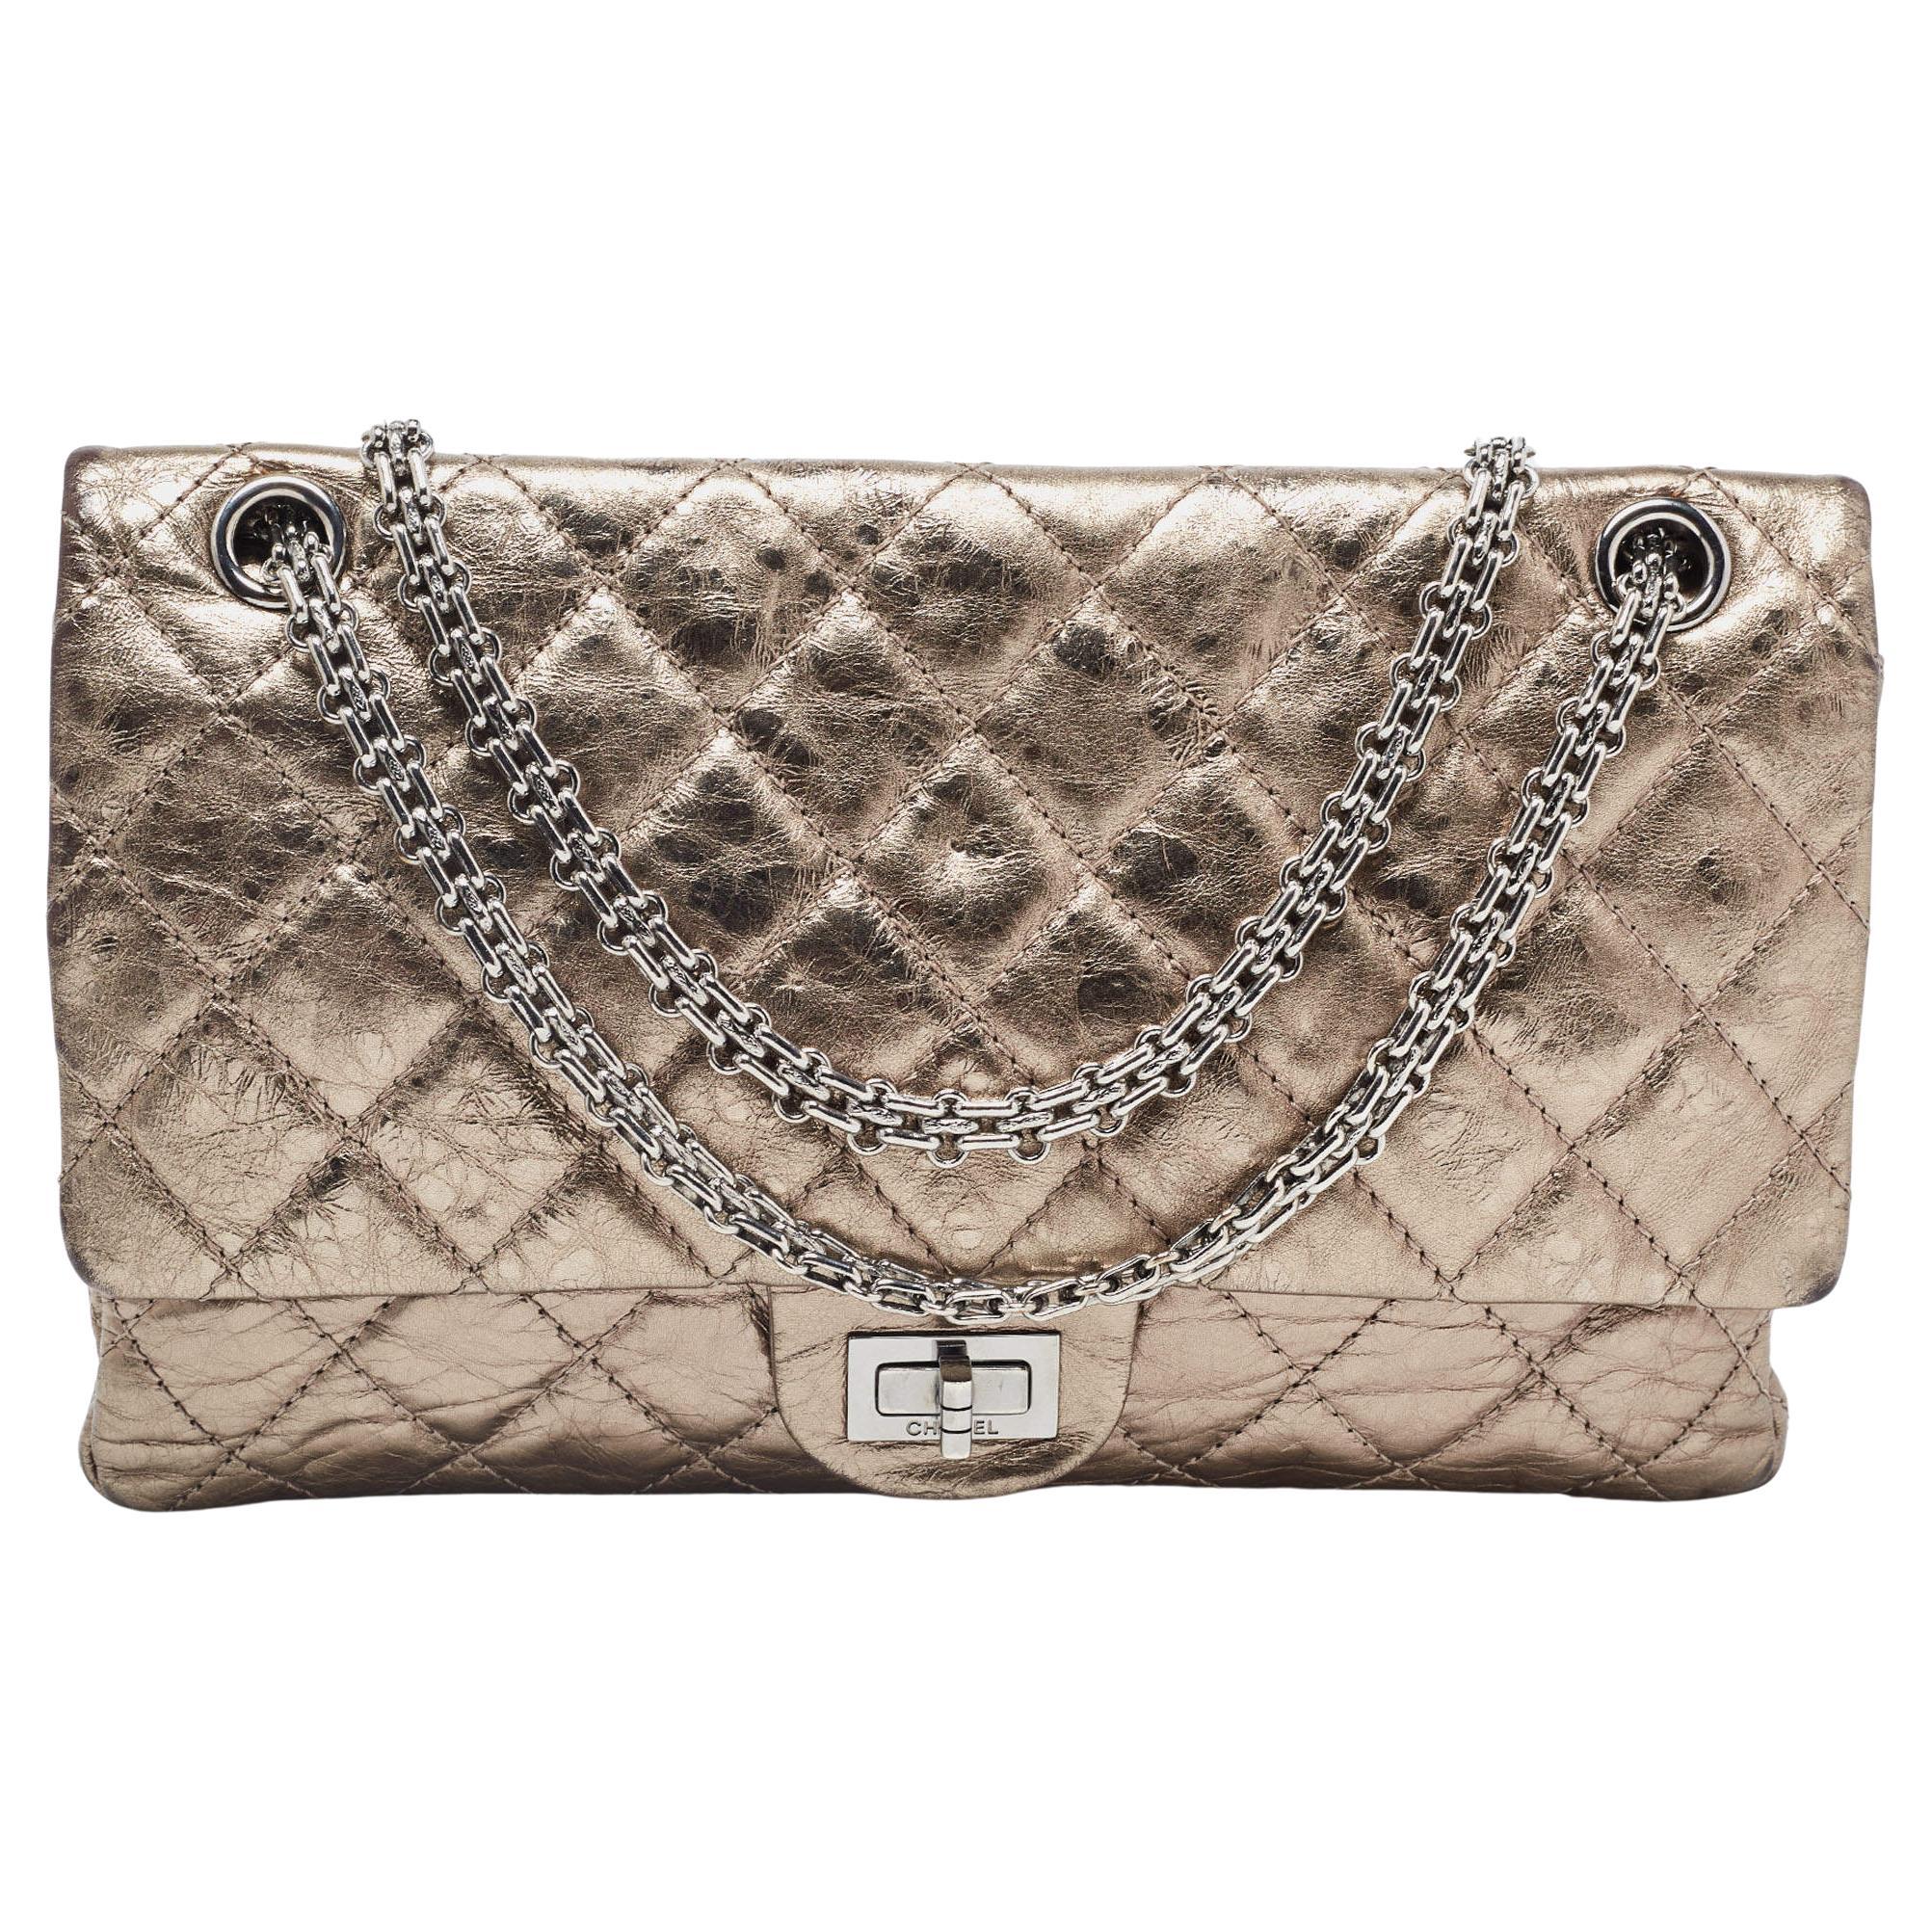 Chanel Metallic Quilted Aged Leather Reissue 2.55 Classic 226 Klappentasche